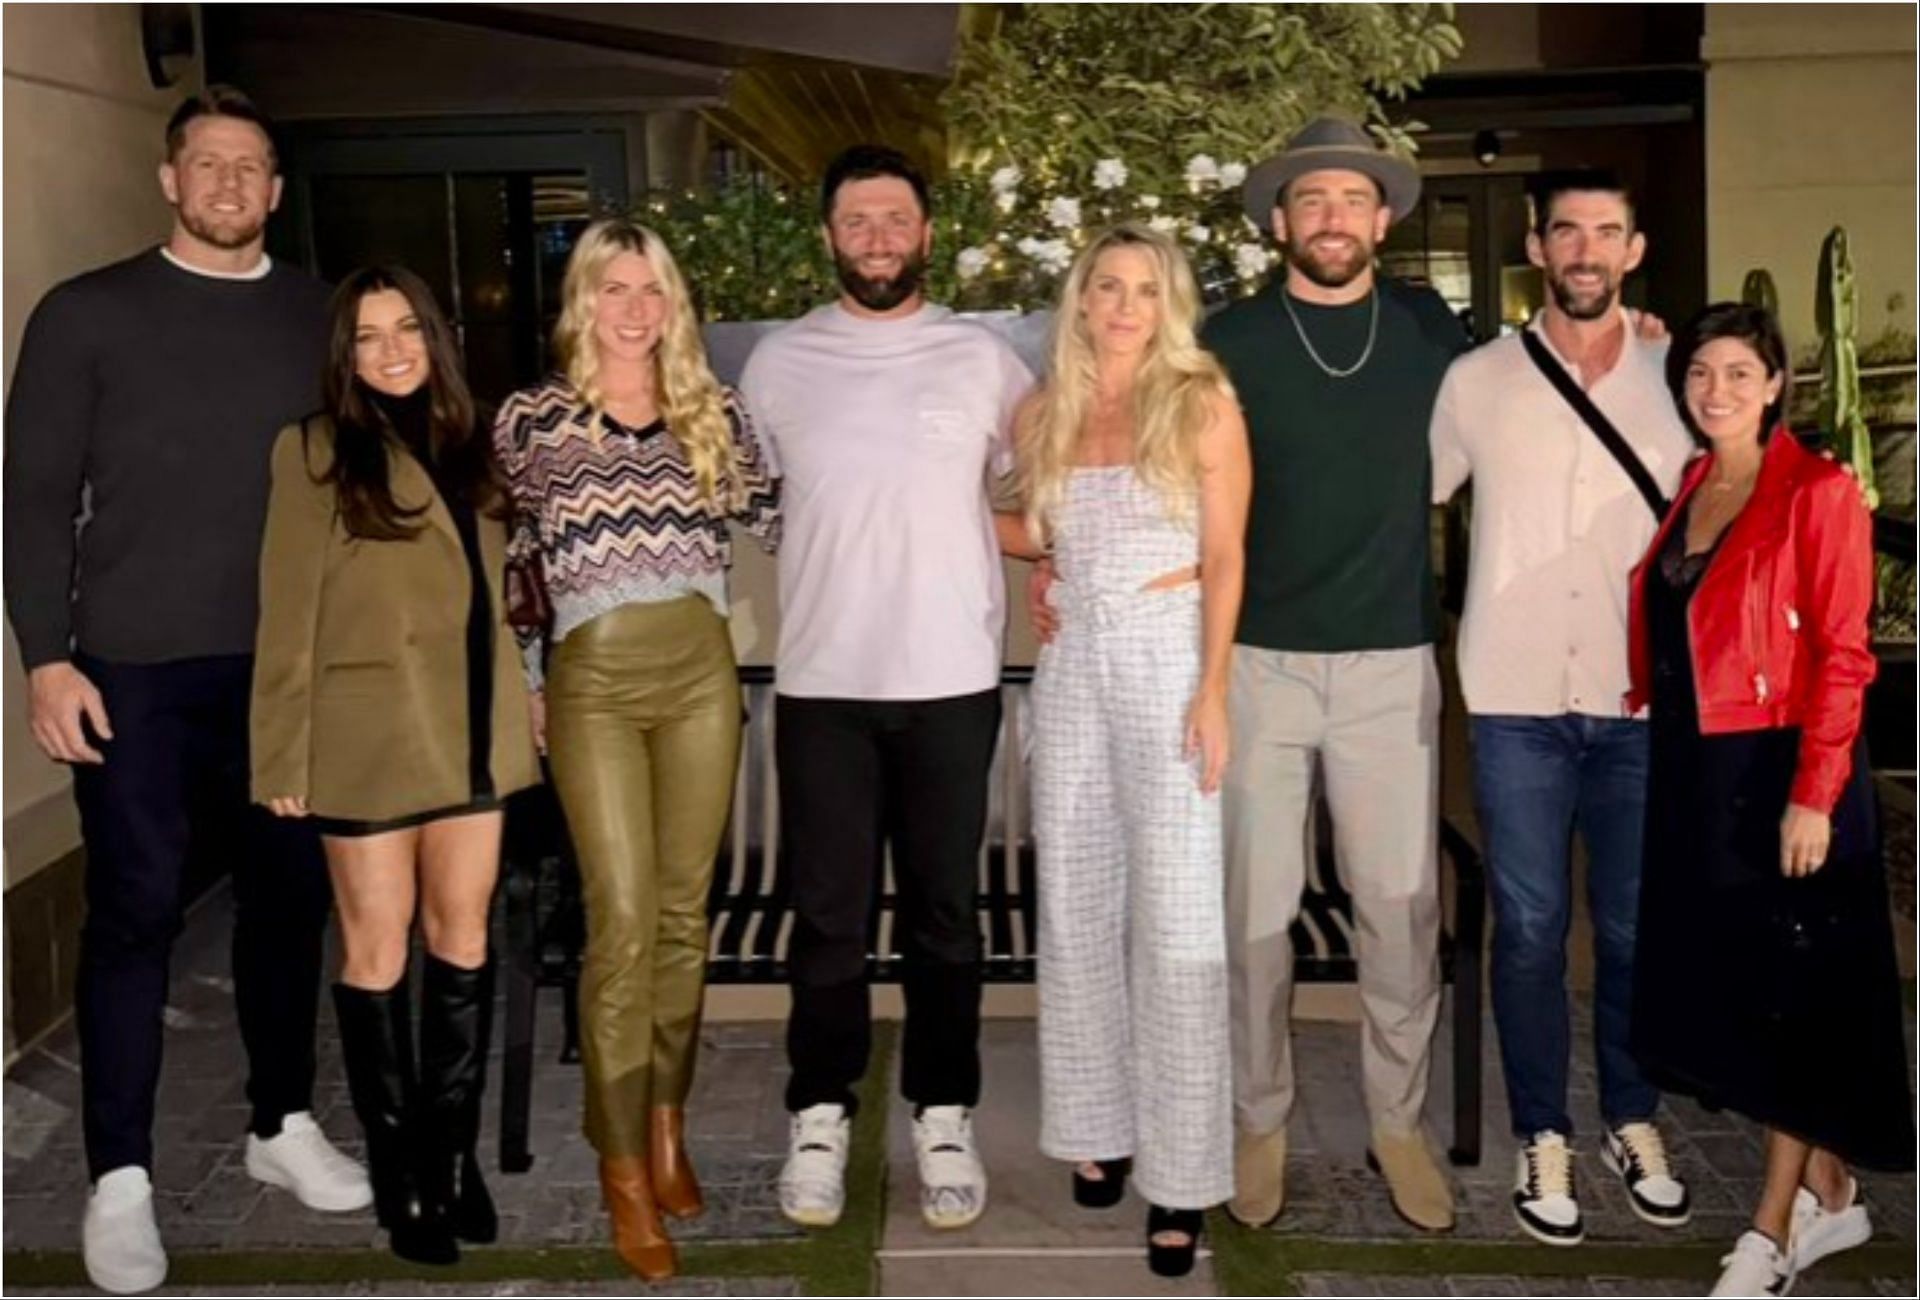 JJ Watt and his wife, Jon Rahm and his wife, Zach Ertz and his wife, and Michael Phelps family with Michael Phelps and his wife (via Getty Images)